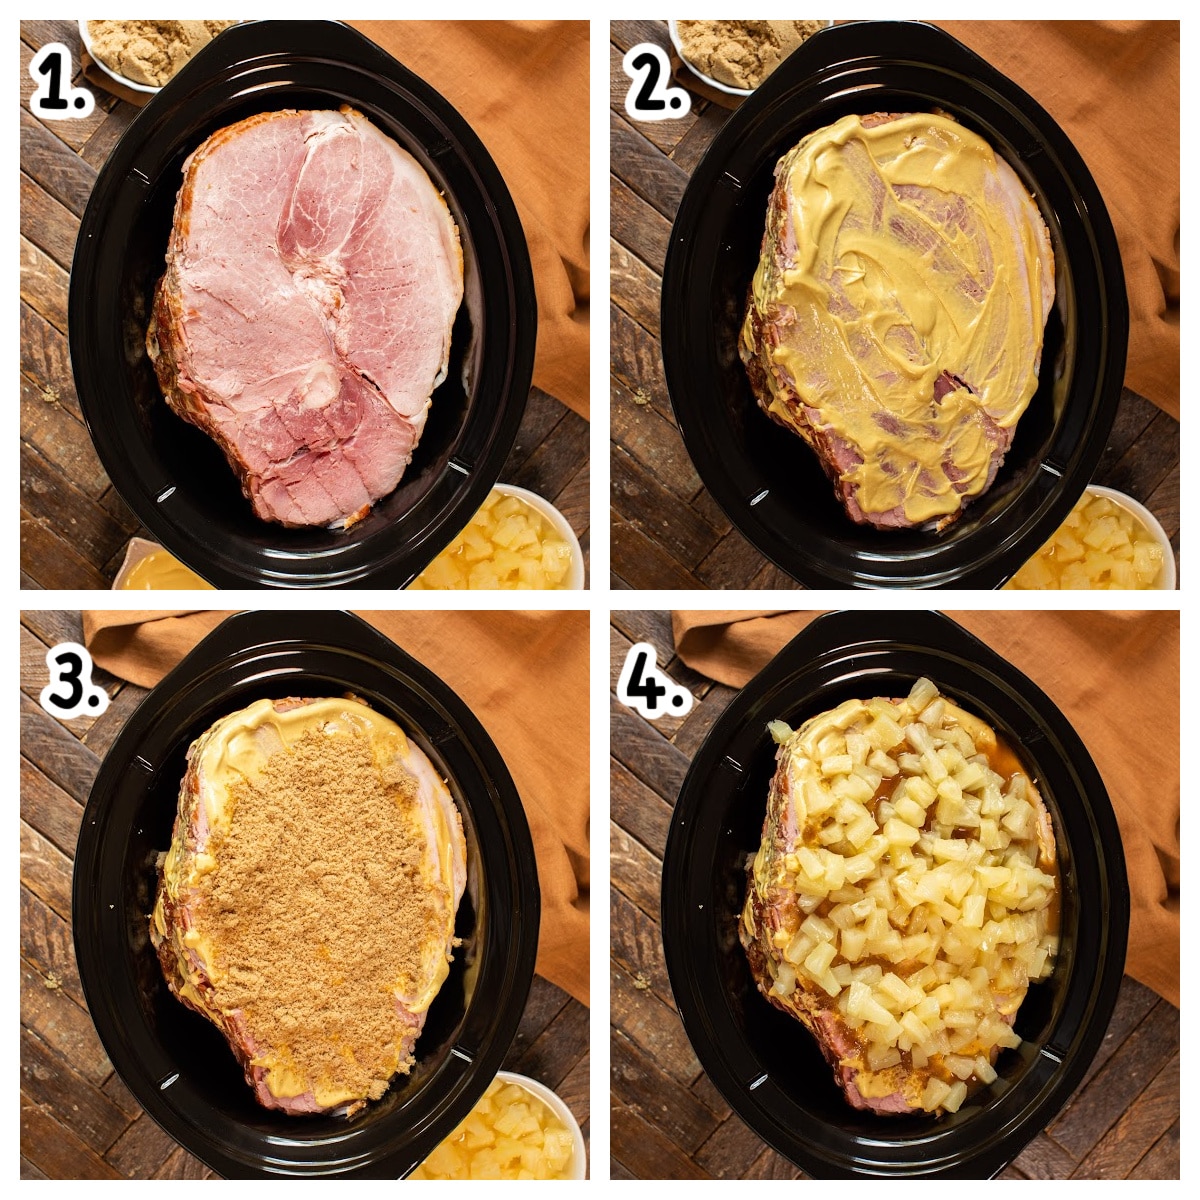 4 images showing how to top ham with mustard, brown sugar and pineapple.